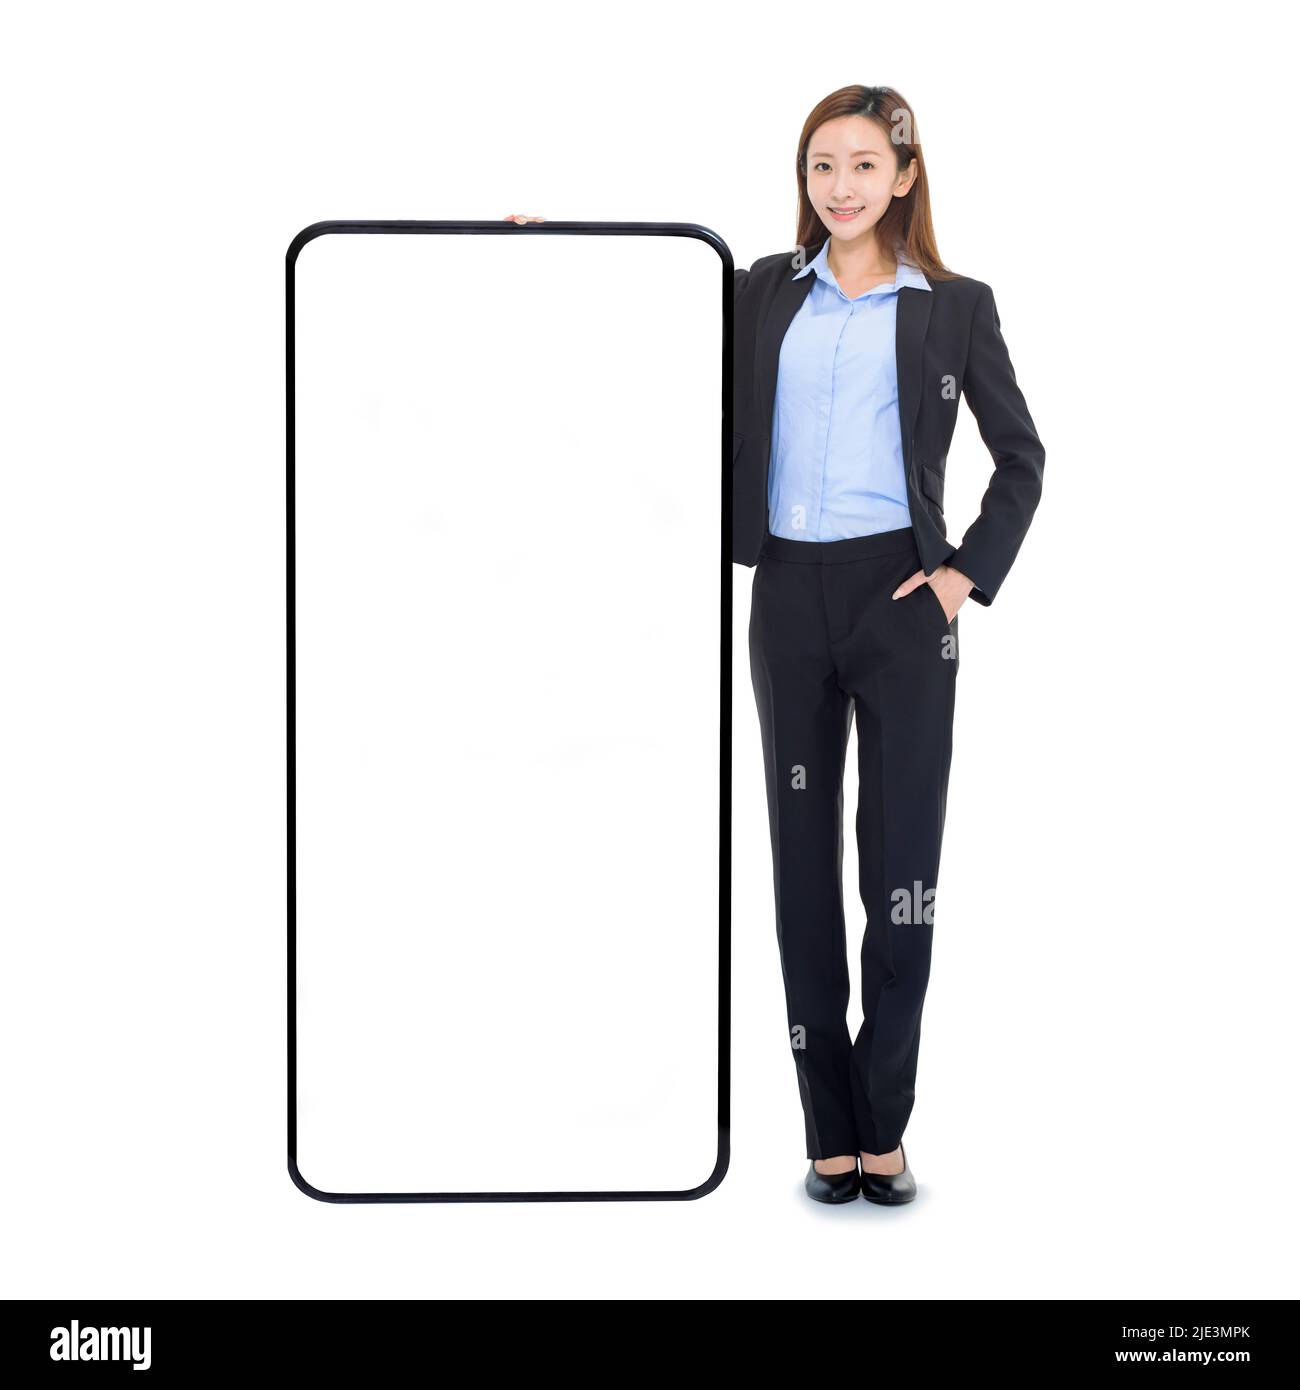 Business woman leaning on huge cellphone with blank white screen,  recommending great new app or website for smart phone Stock Photo